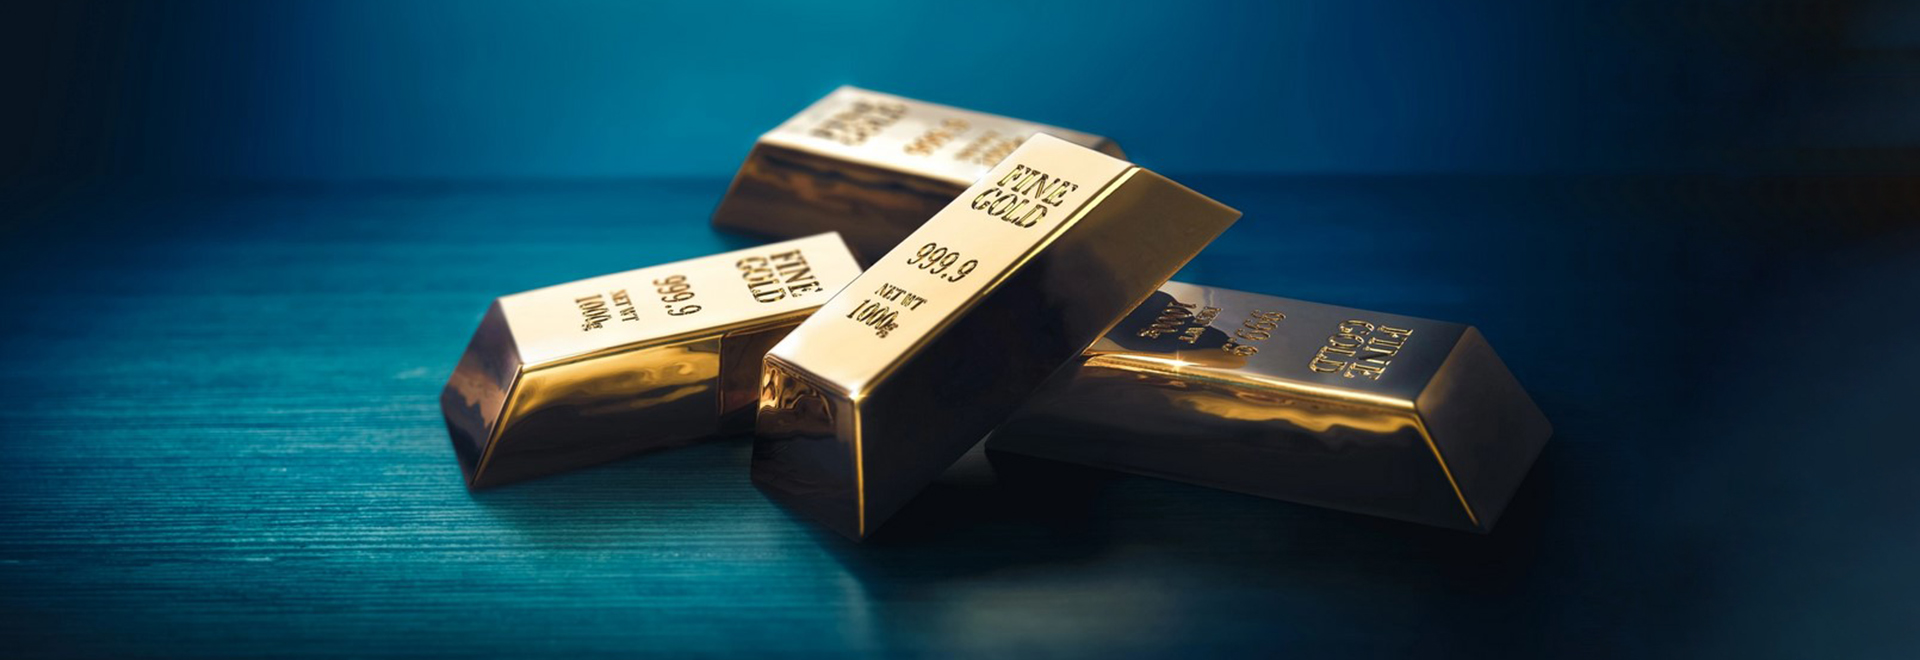 U.S. Inflation Data to Potentially Guide Precious Metals